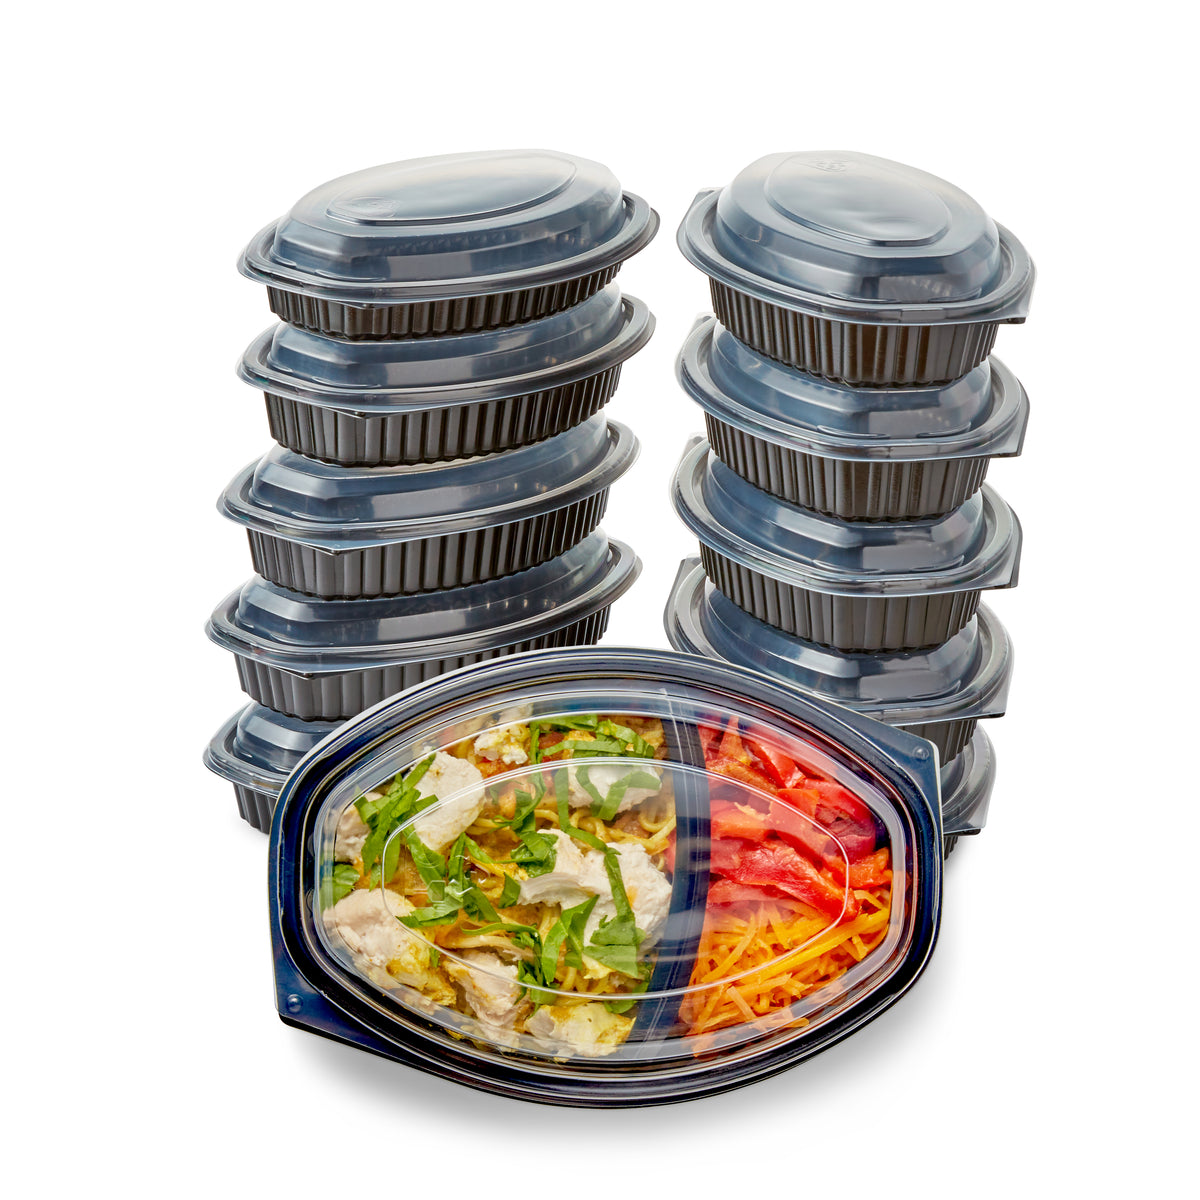 10 x 560 ml (19.8 ounce) Microwavable Twin Hot Food Meal Prep Trays & Lids (207mm x 143mm x 59mm)